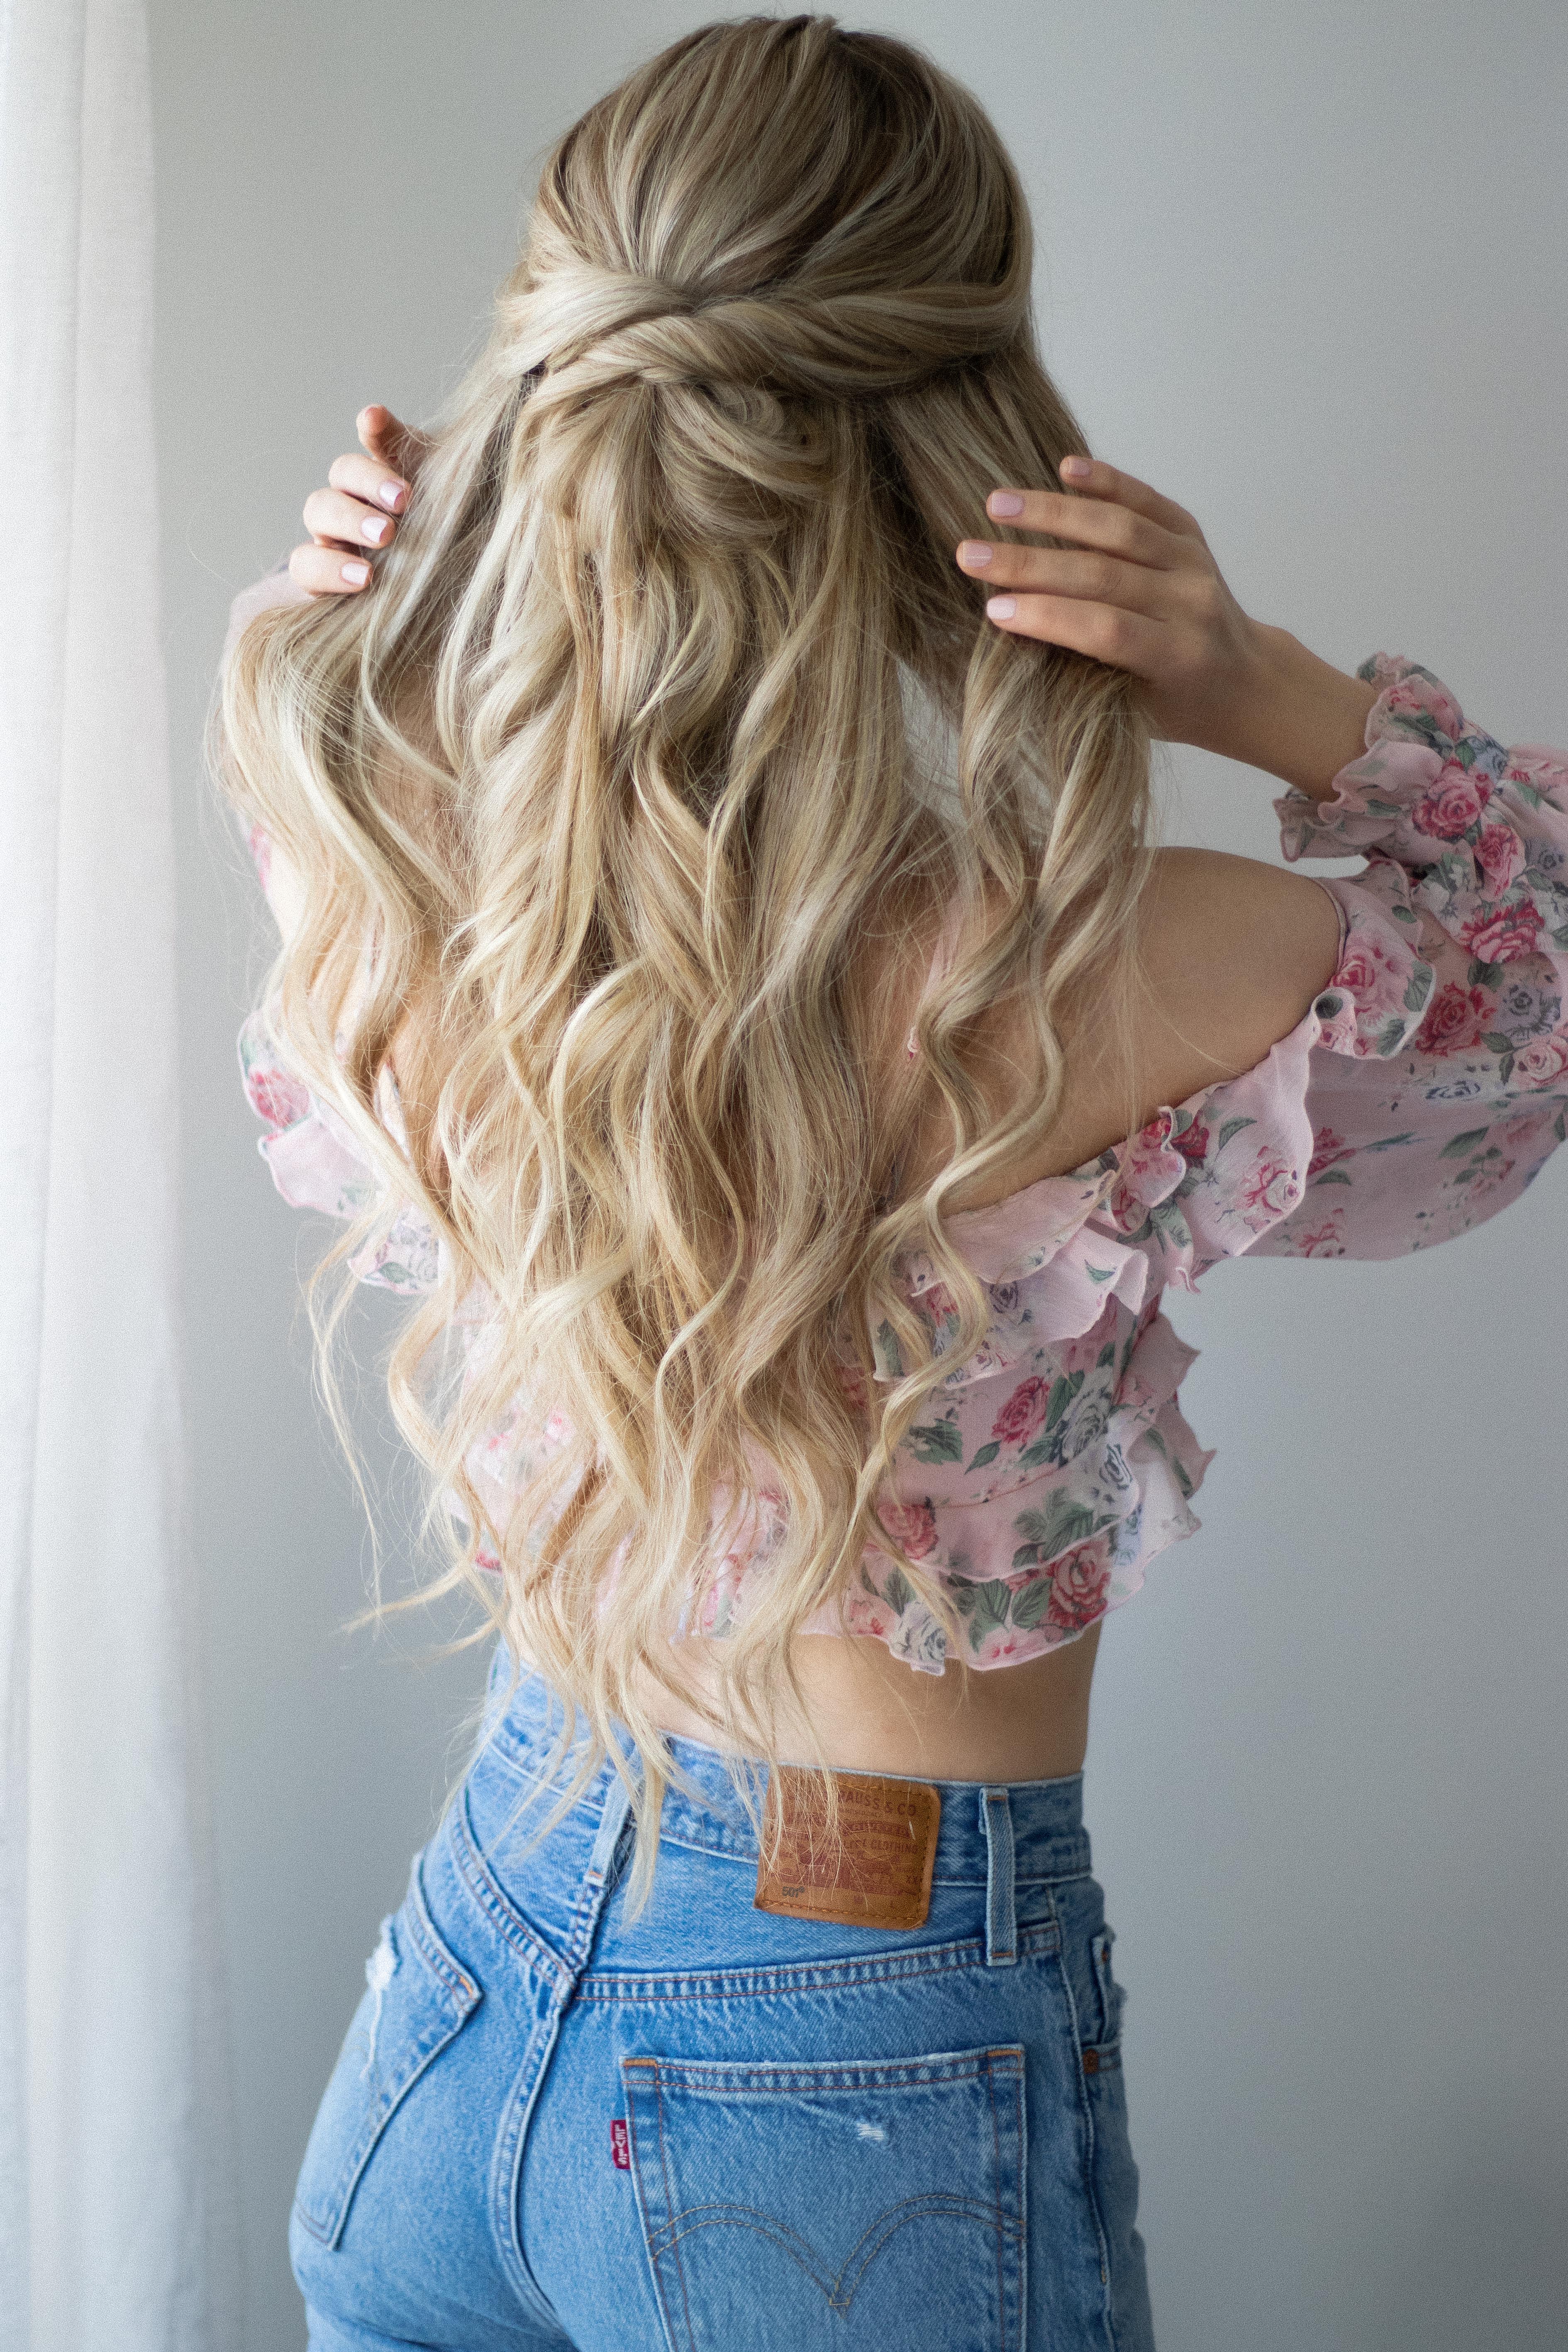 10 Summer Hairstyles You Need To Try - Society19